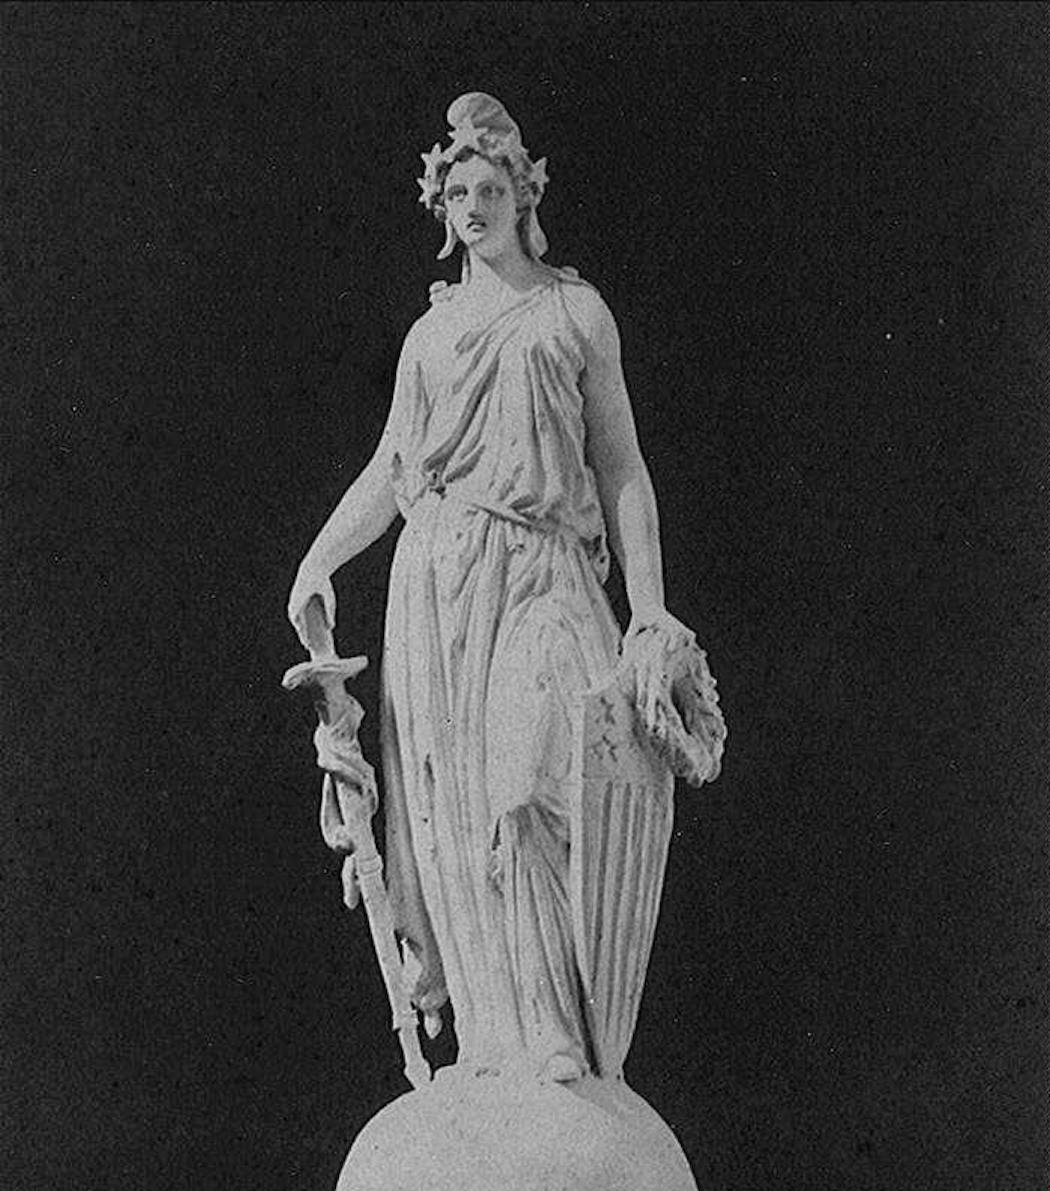 An early model of the Statue of Freedom shows Freedom wearing a liberty cap. Secretary of War Jefferson Davis asked Thomas Crawford to change it because of the cap's association with the abolition movement.